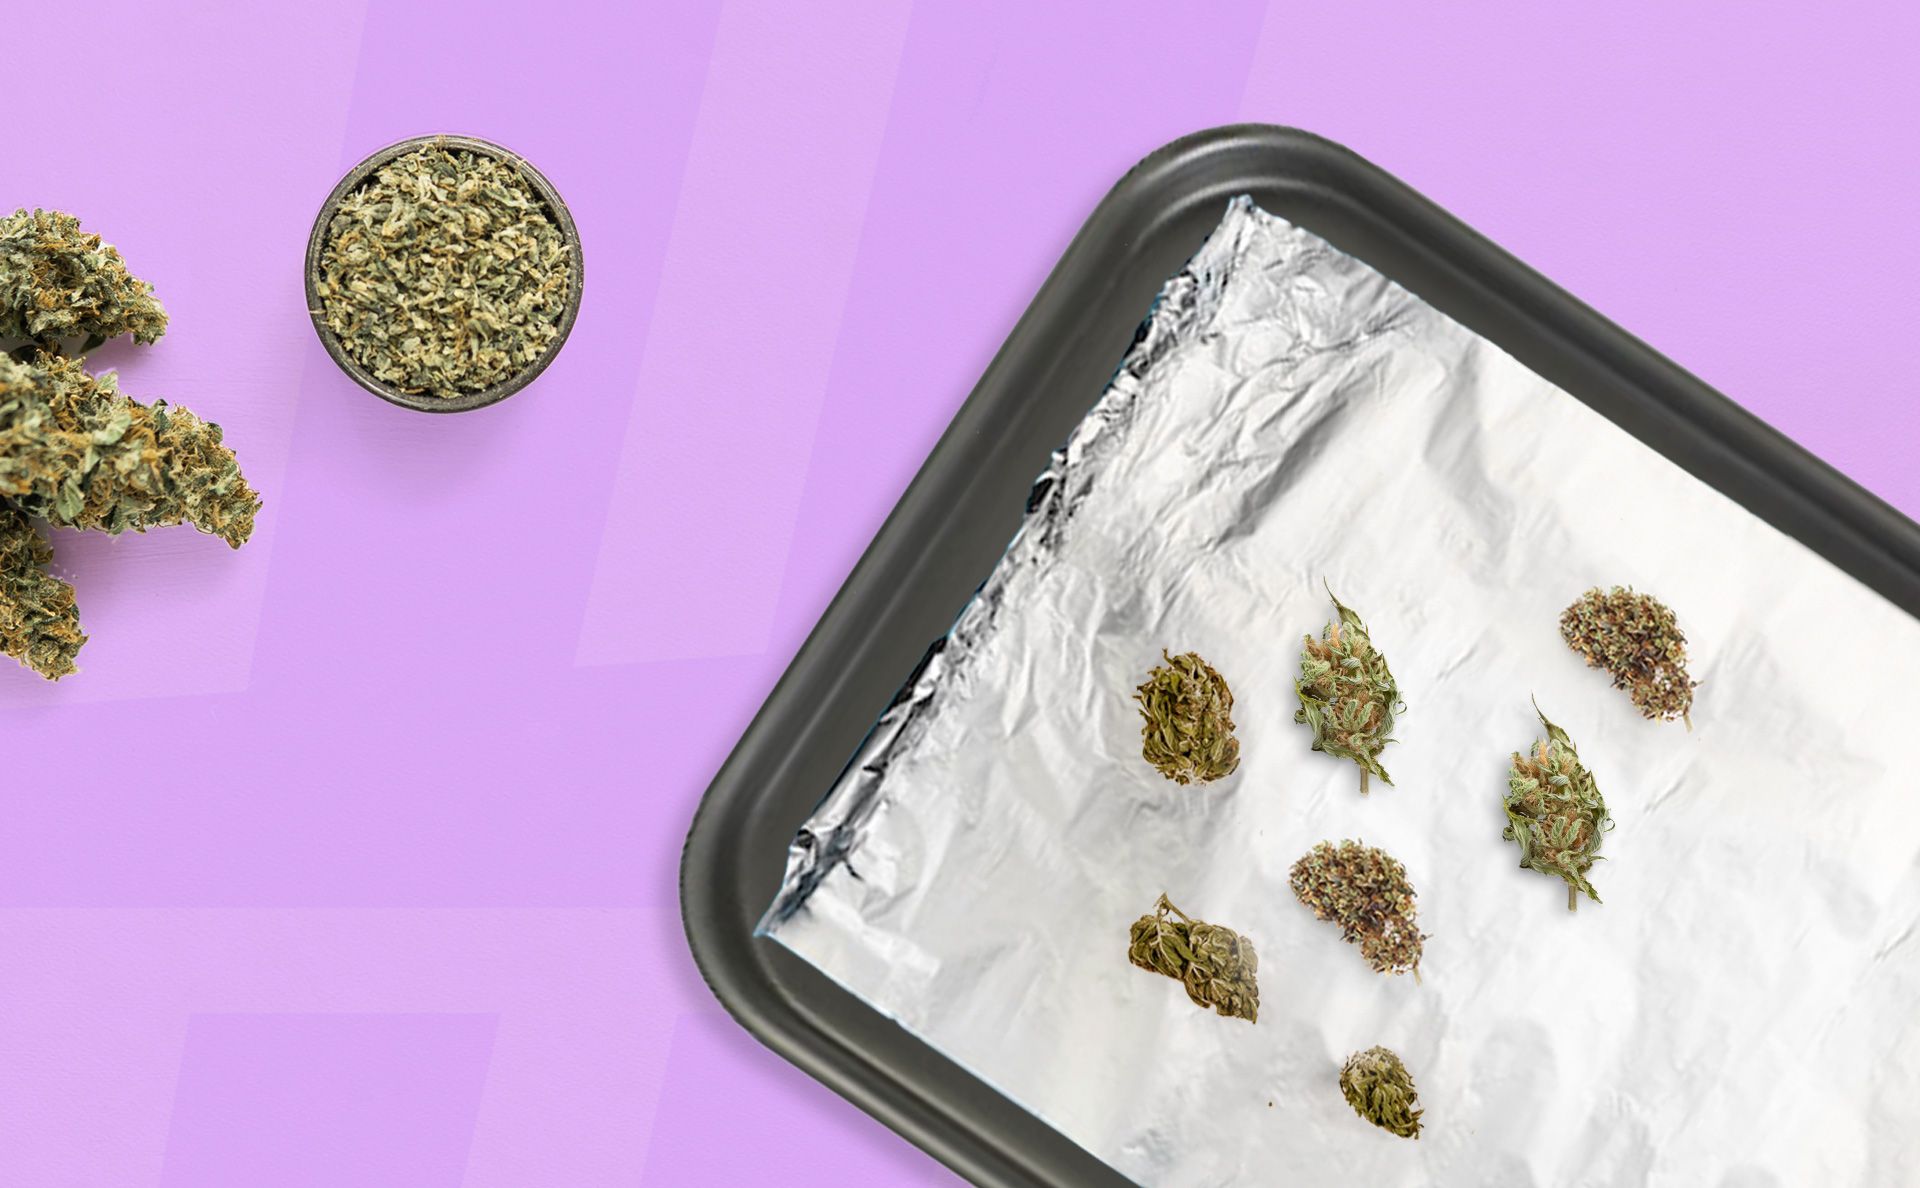 What is Decarboxylation?